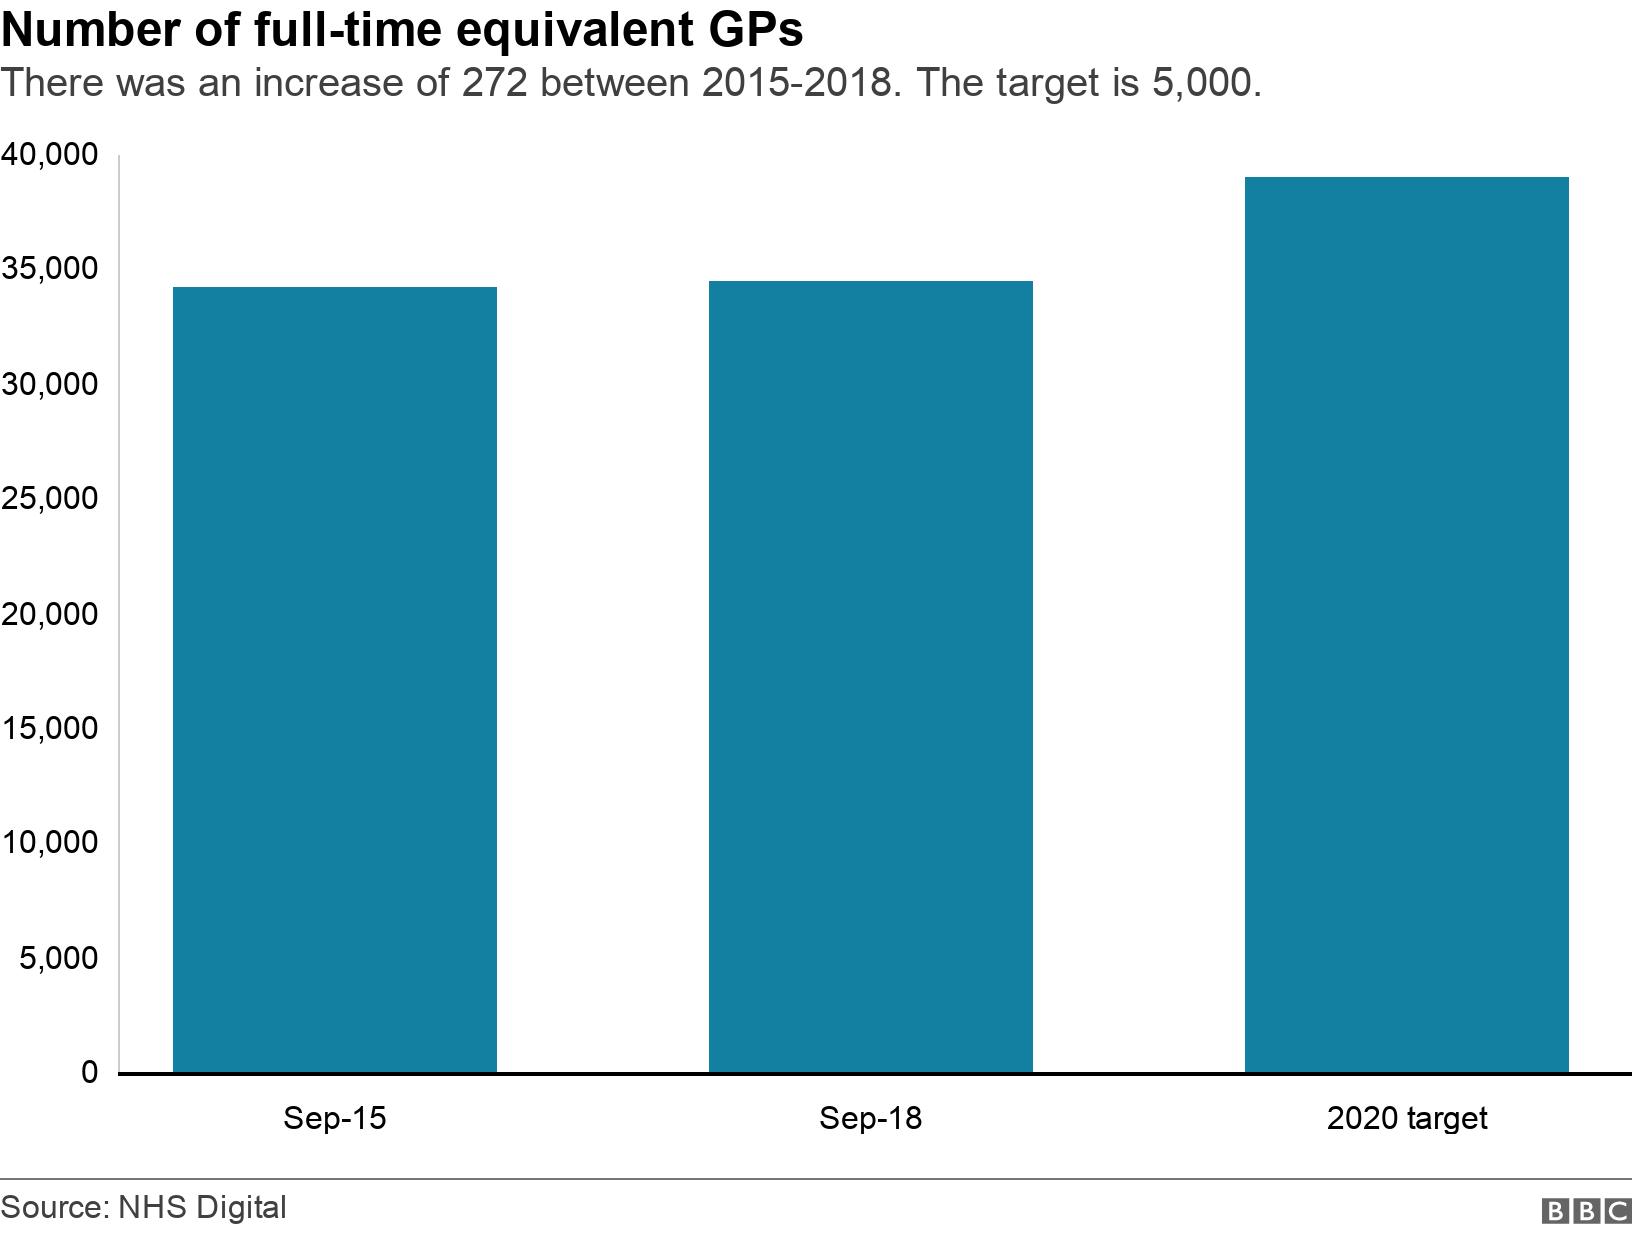 Number of full-time equivalent GPs. There was an increase of 272 between 2015-2018. The target is 5,000.. In September 2015, there were 34,262 full-time equivalent GPs (based on the latest revised figures). However, by September 2018 (the most recent comparable month) there were about 34,534 full-time equivalent GPs in post. For the government's target to be met there would need to be about 39,000 GPs in place by 2020. .